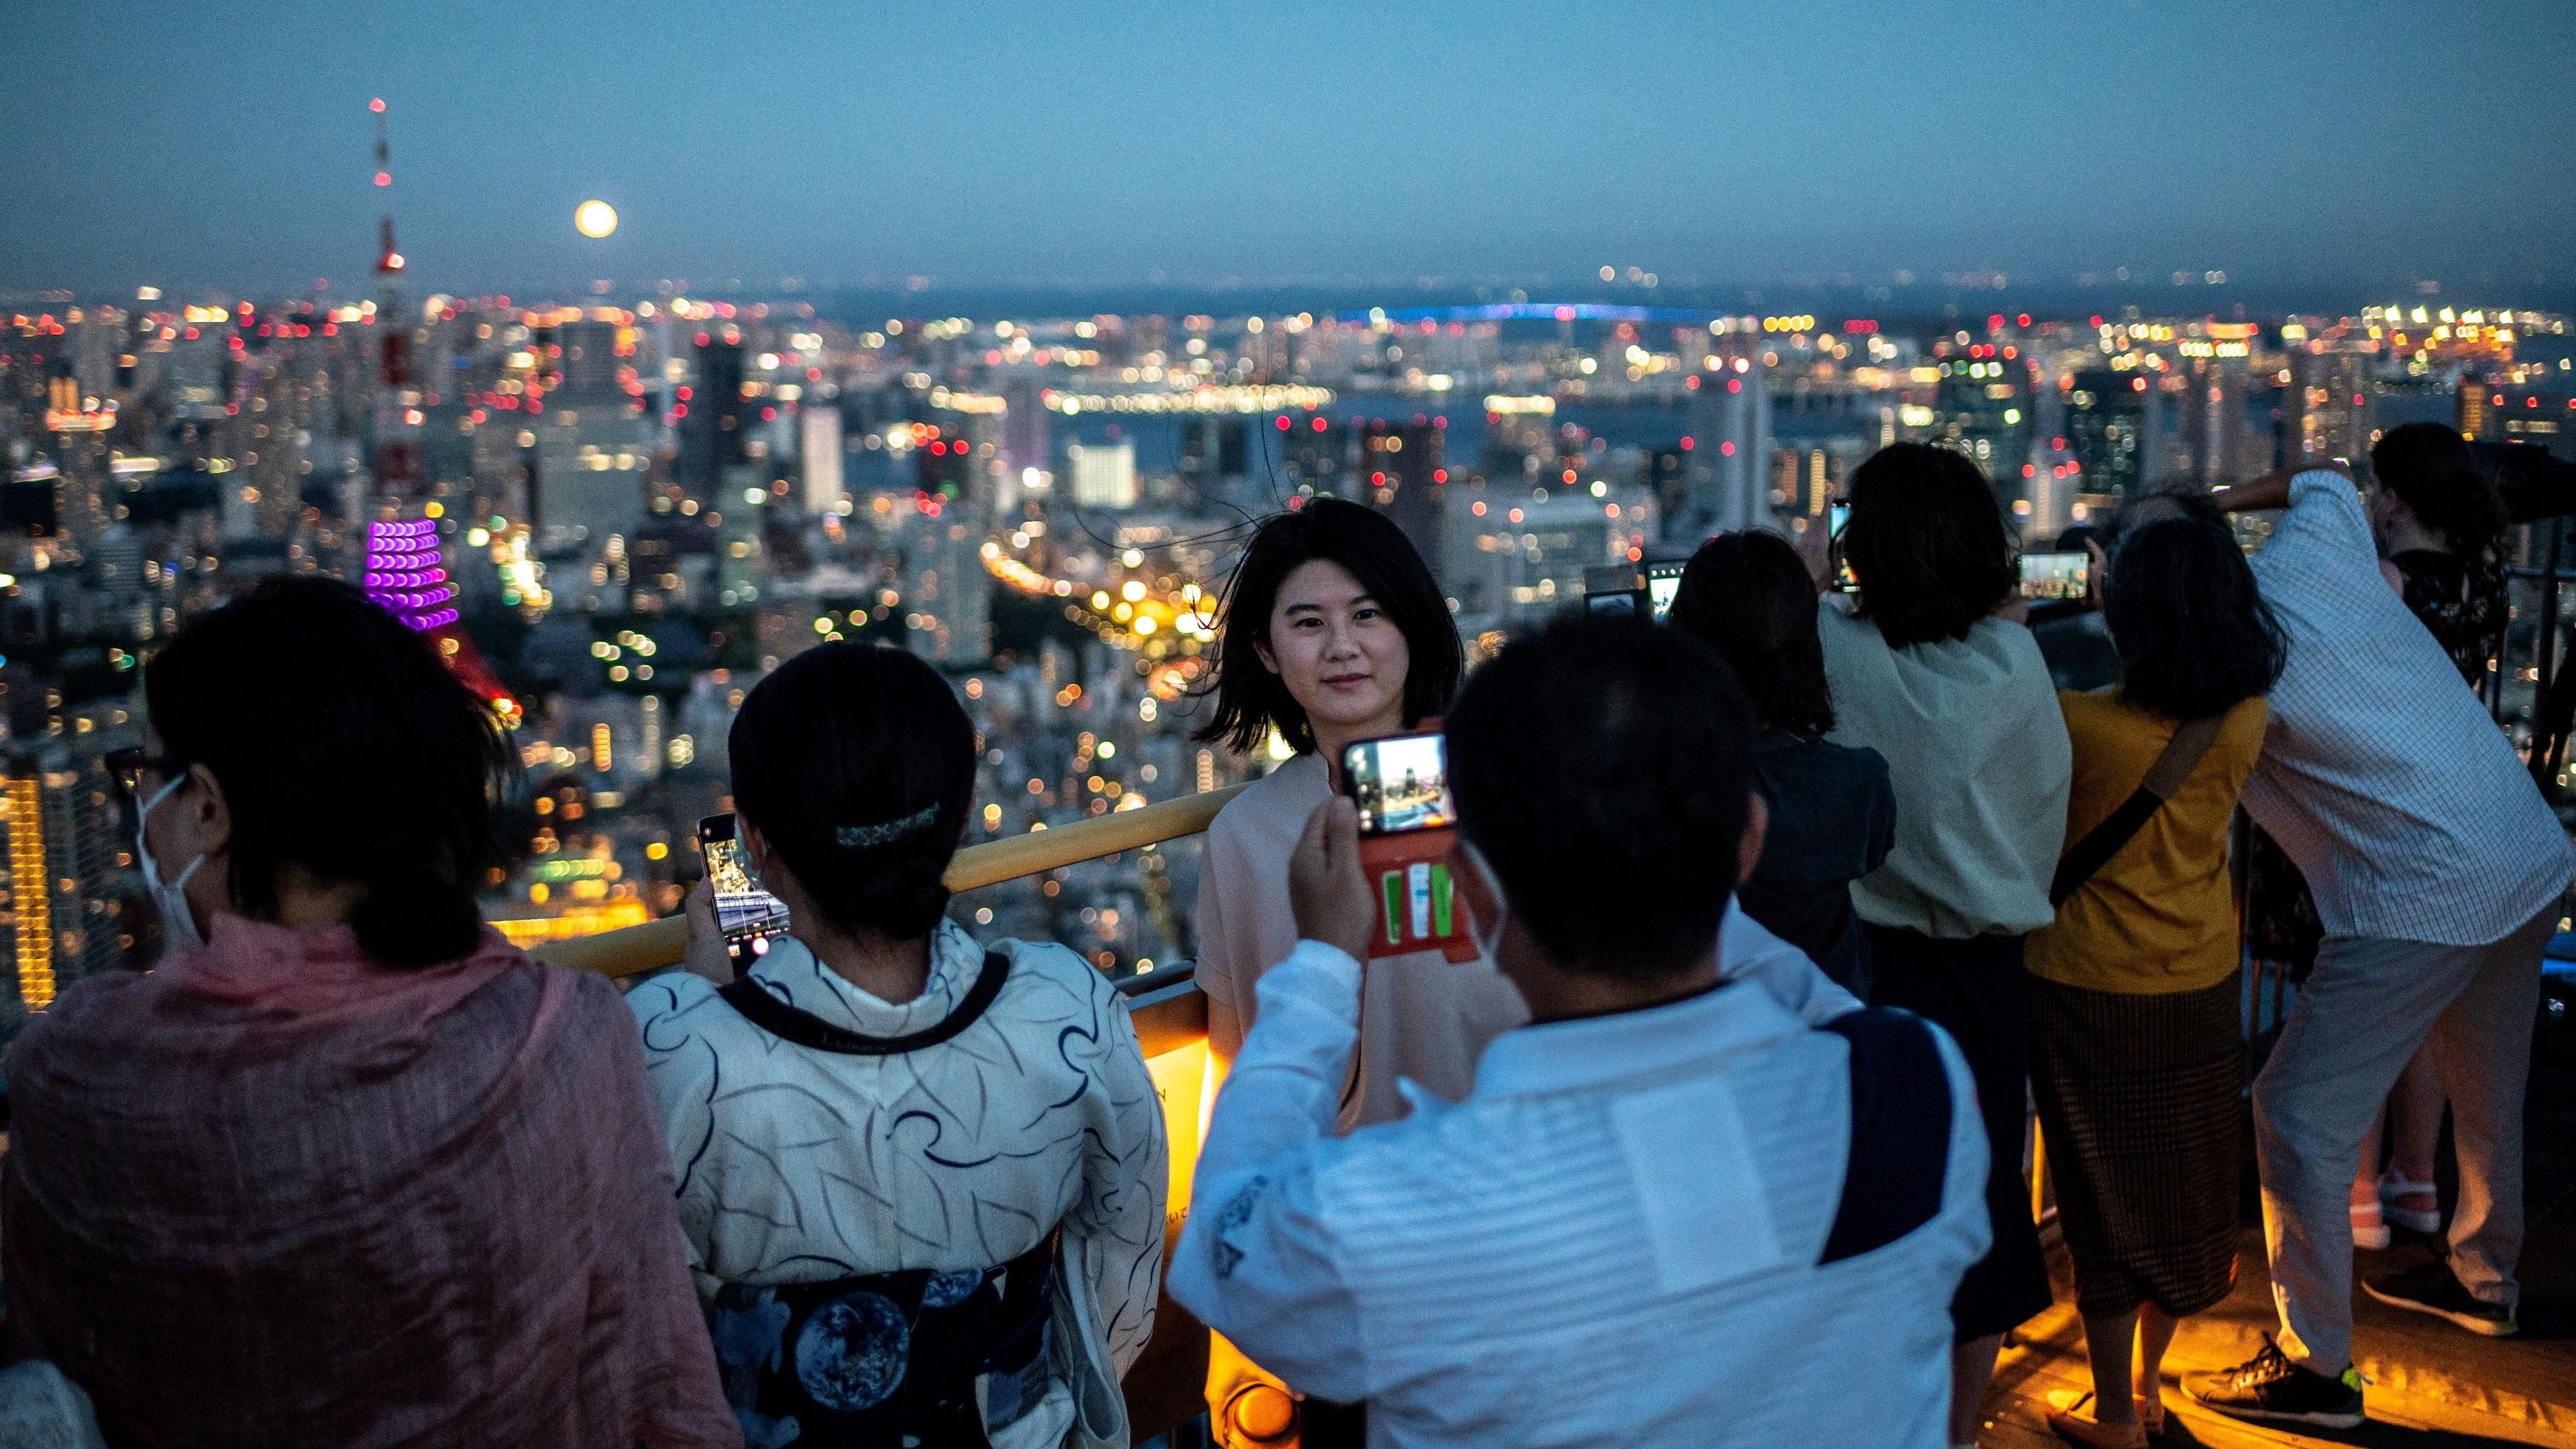 Japan to Fully Reopen to Tourists Despite Record COVID-19 Cases in August